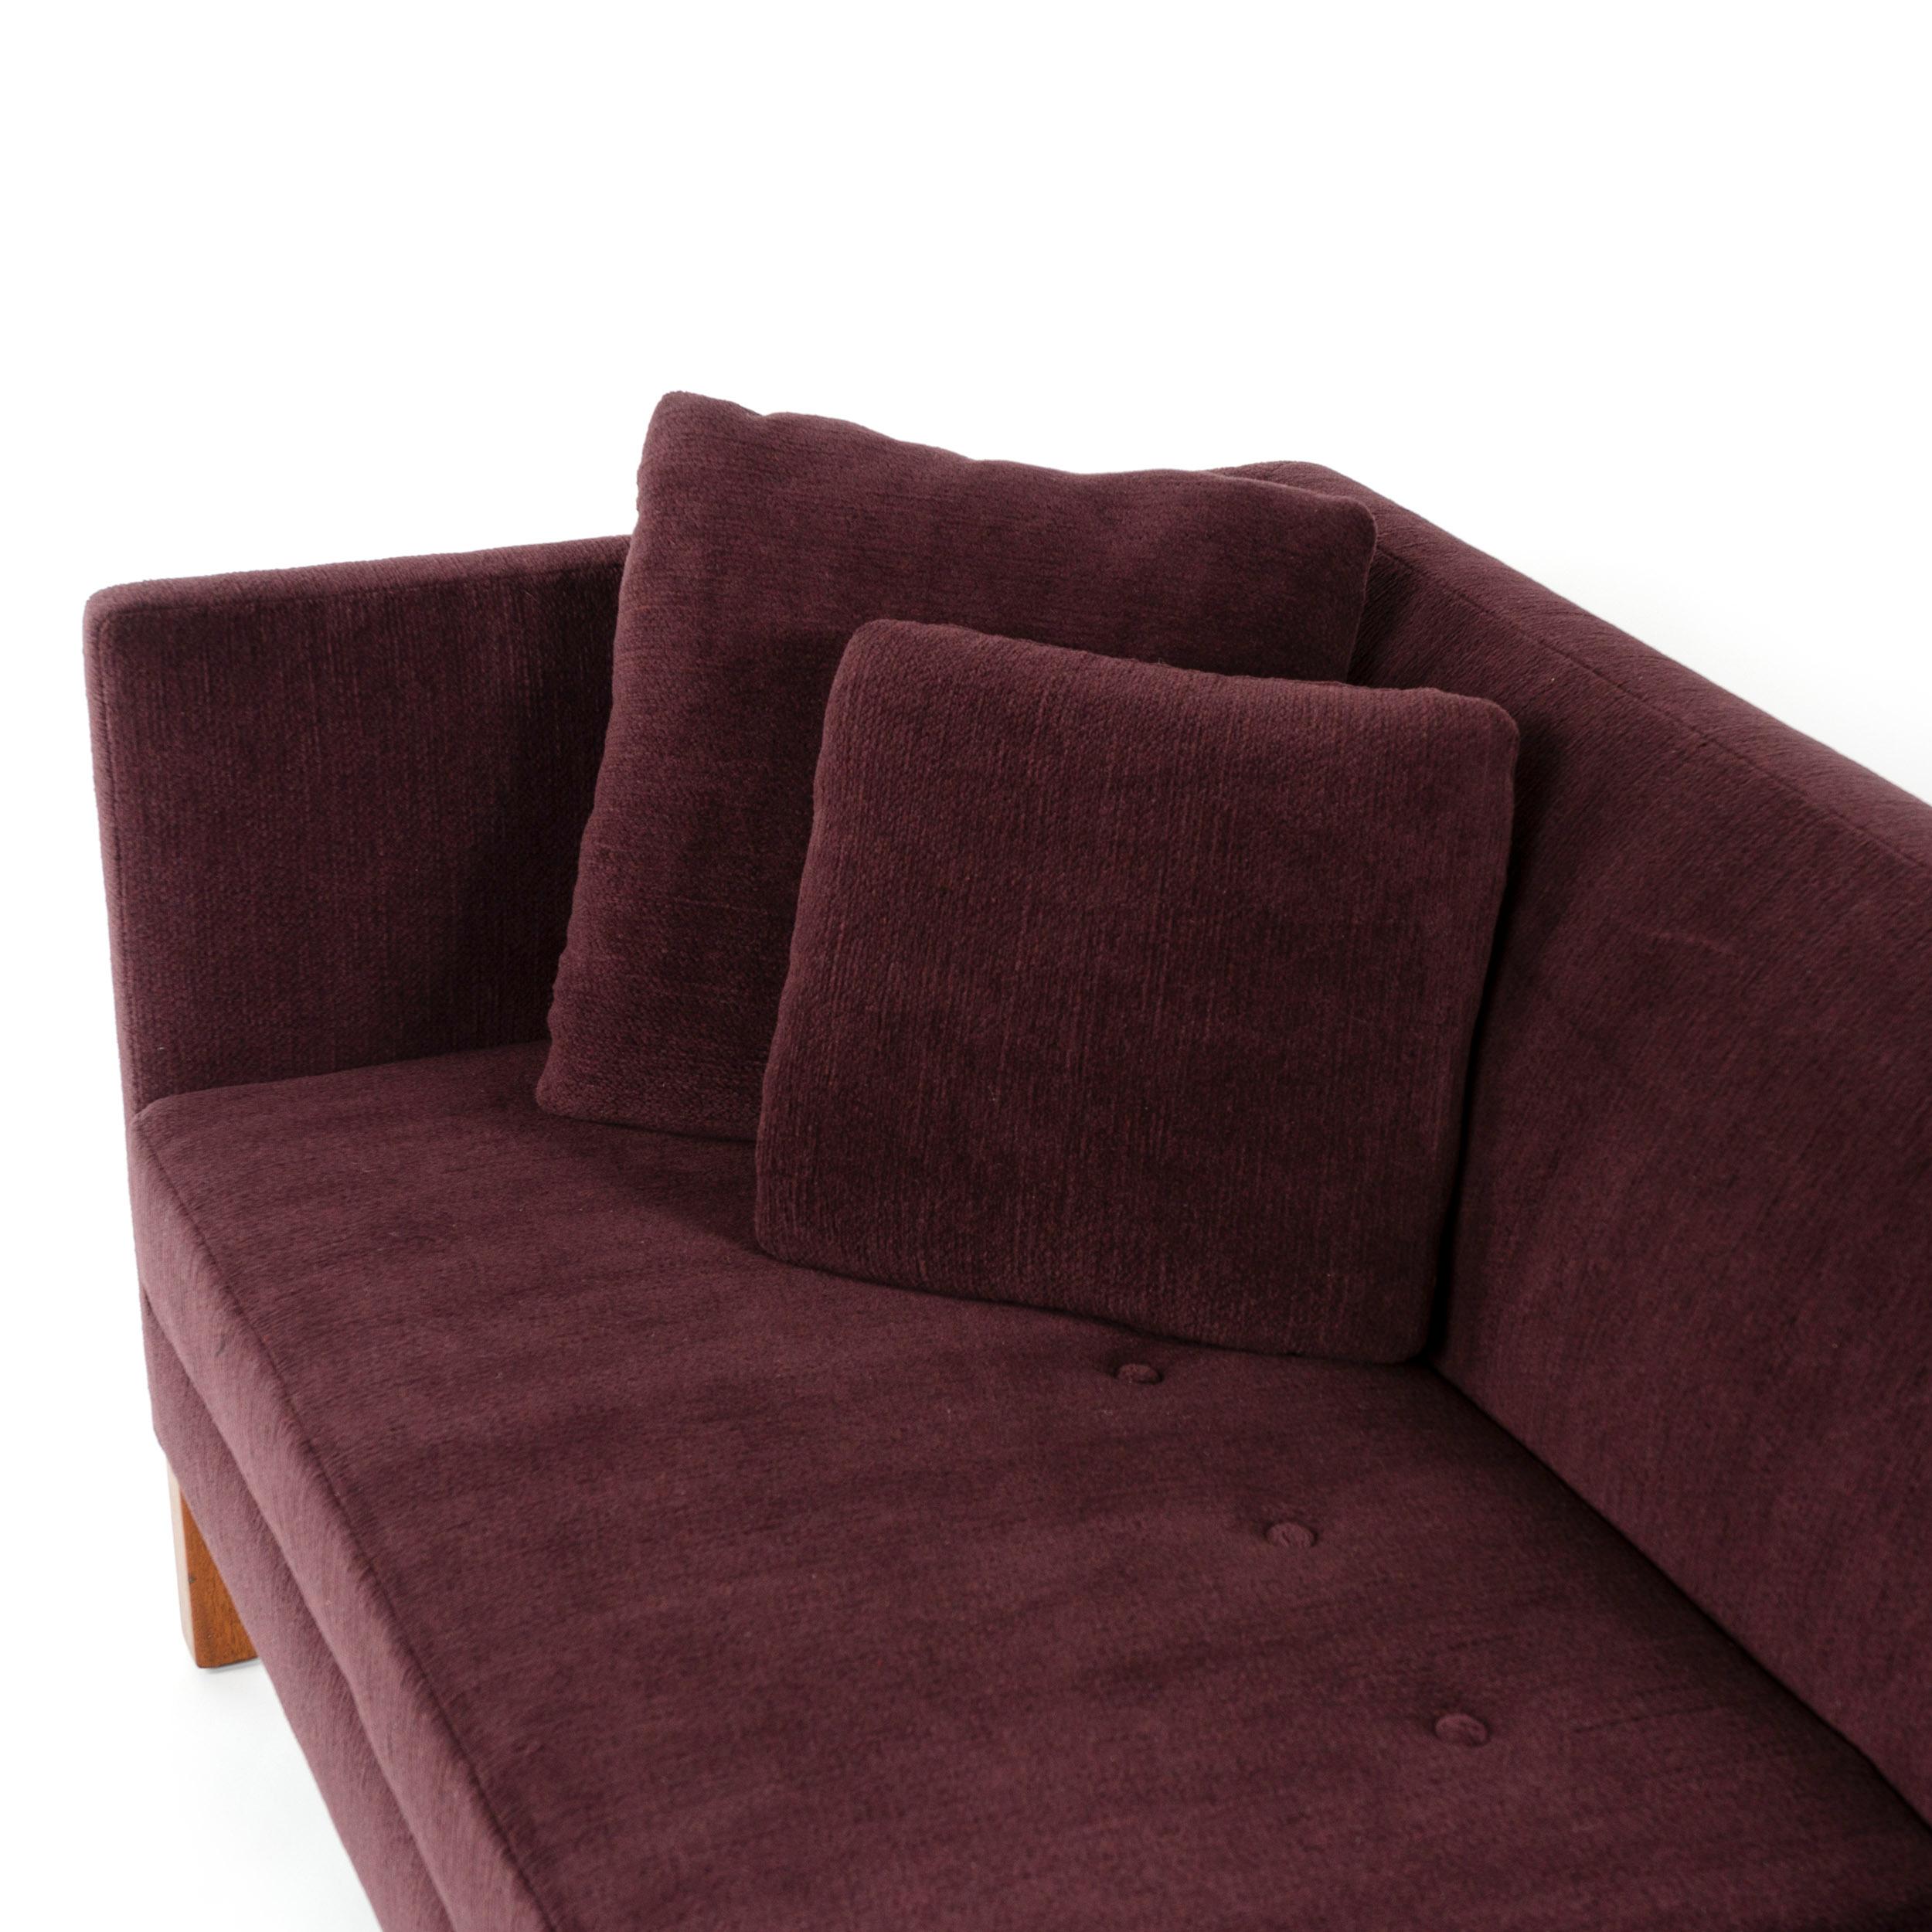 American Upholstered Square Arm Sofa by Edward Wormley for Dunbar